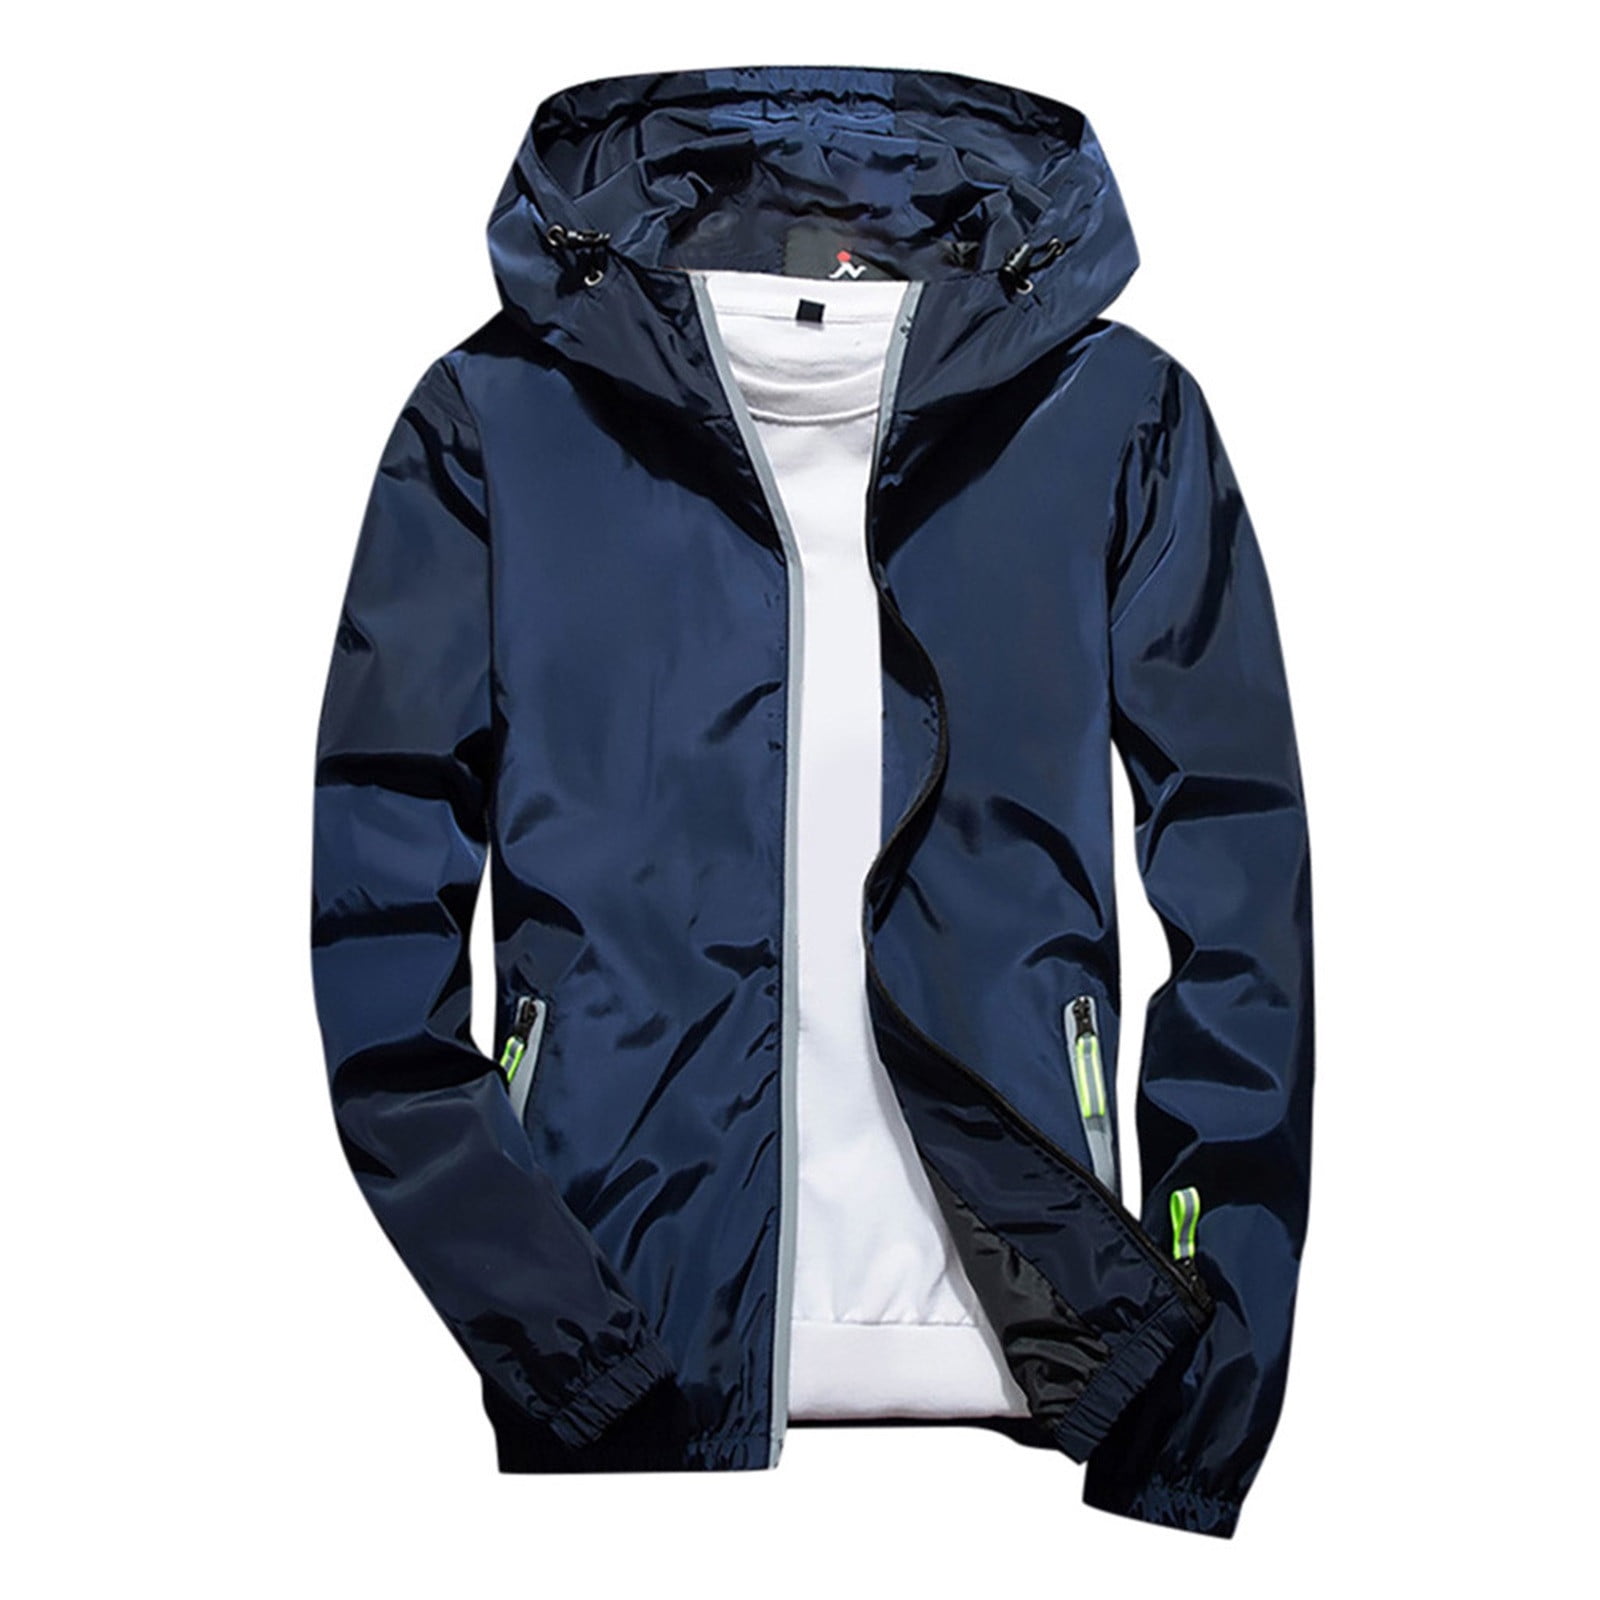 Mens Lightweight Jacket with Reflective Zippers Hooded Waterproof ...